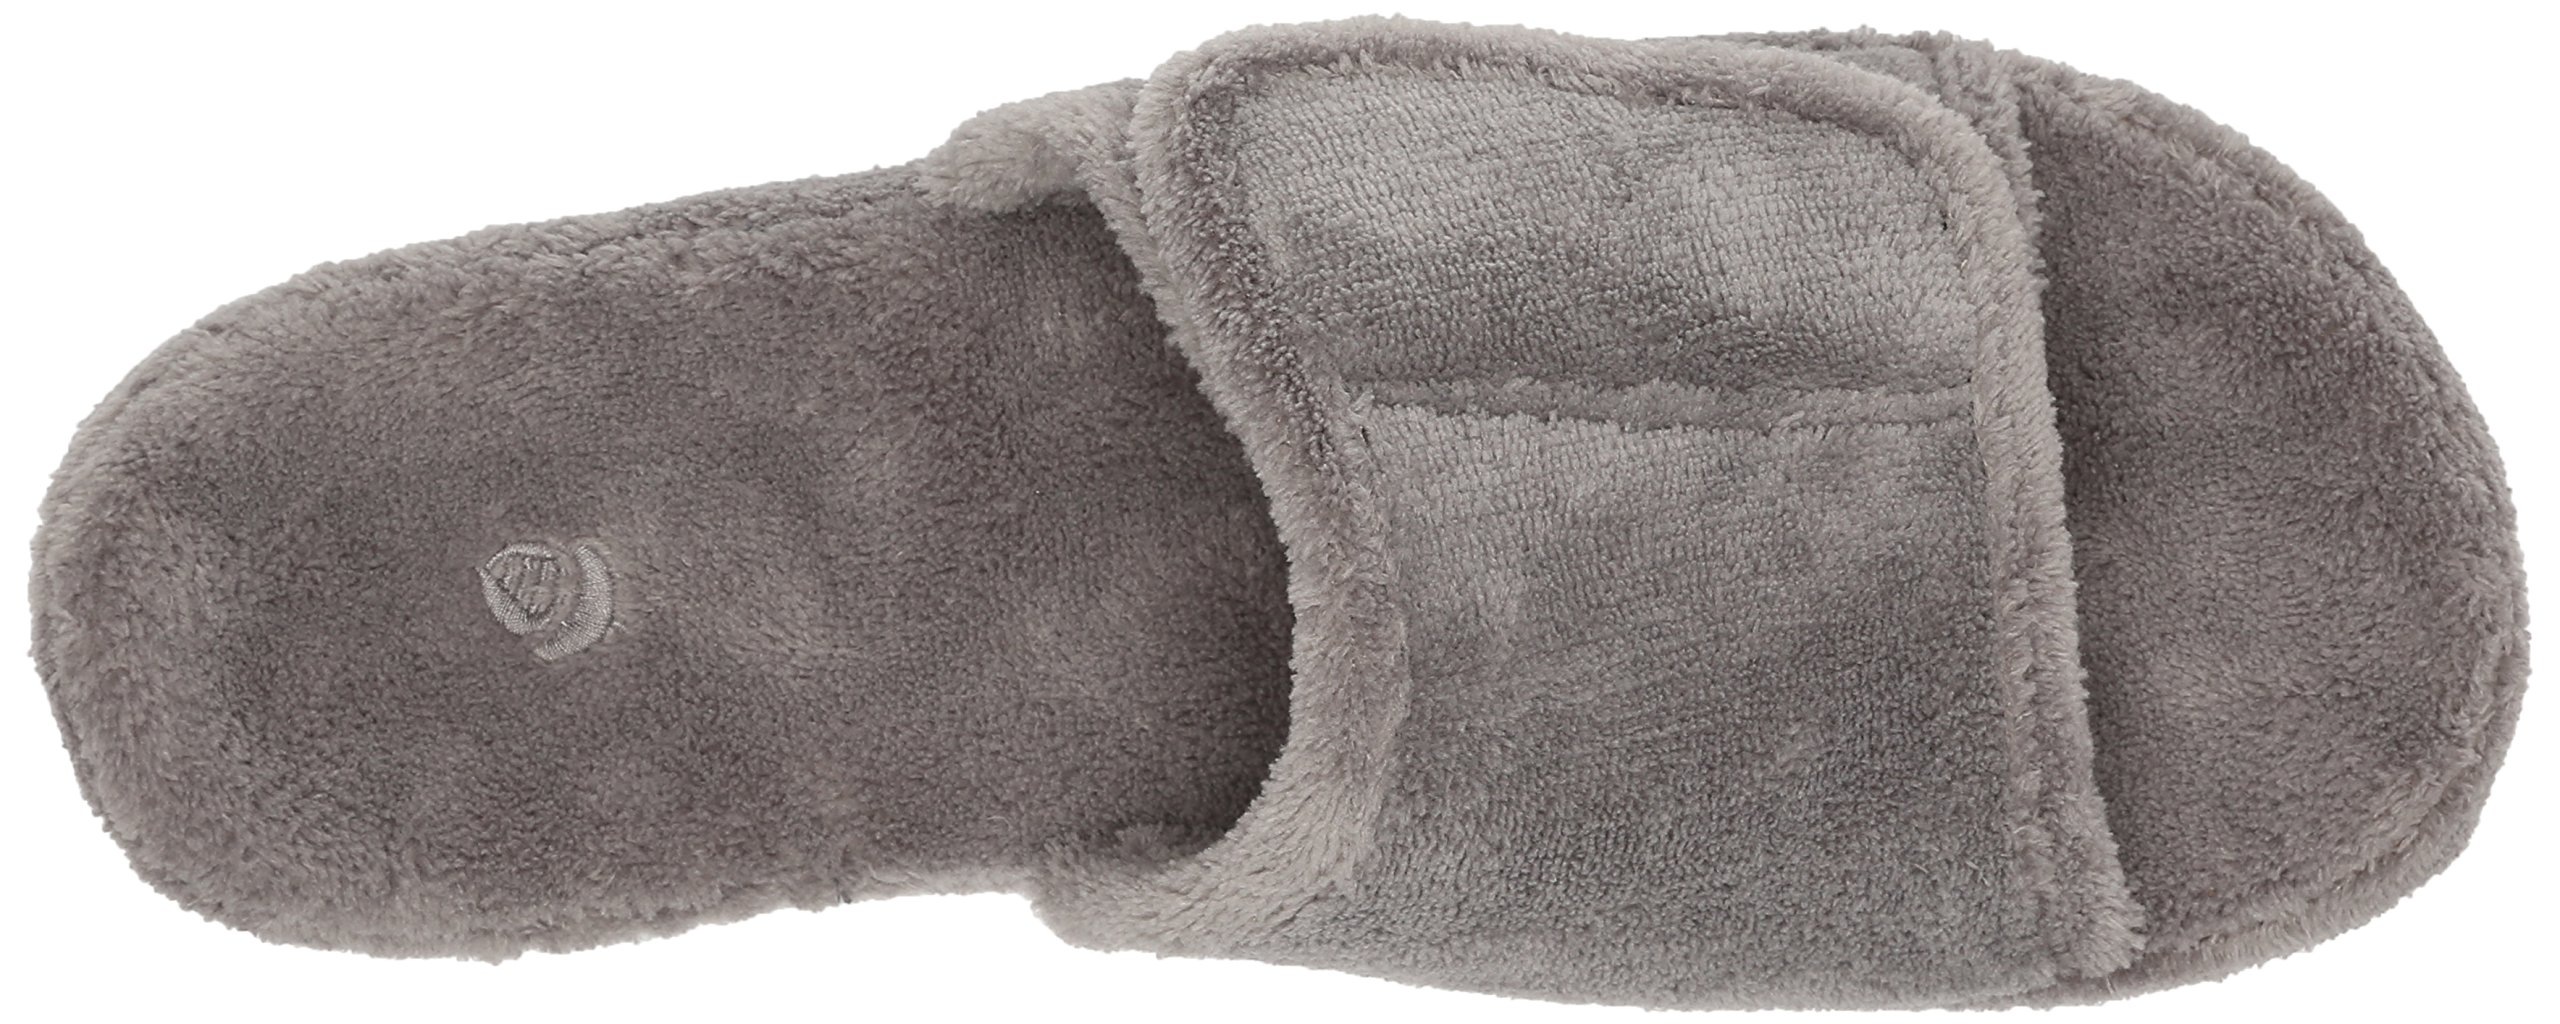 Acorn Men's Spa Slide Slippers with Adjustable Strap and Soft Terry Lining